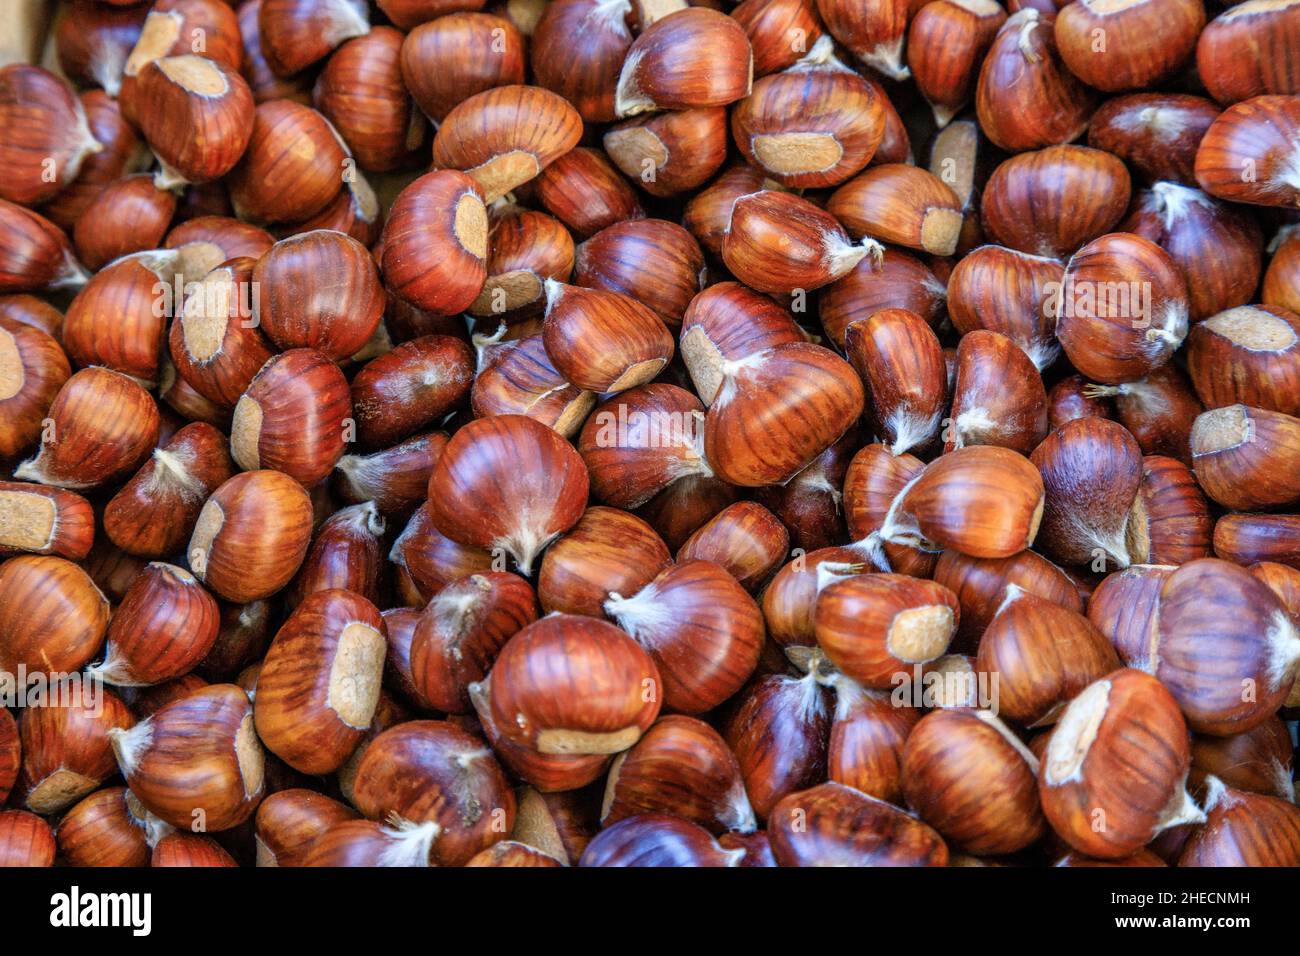 France, Var, Massif des Maures, Collobrieres, chestnut crate during the  Fetes de la Chataigne (Chestnut Festival) on the last three Sundays in Octobe Stock Photo